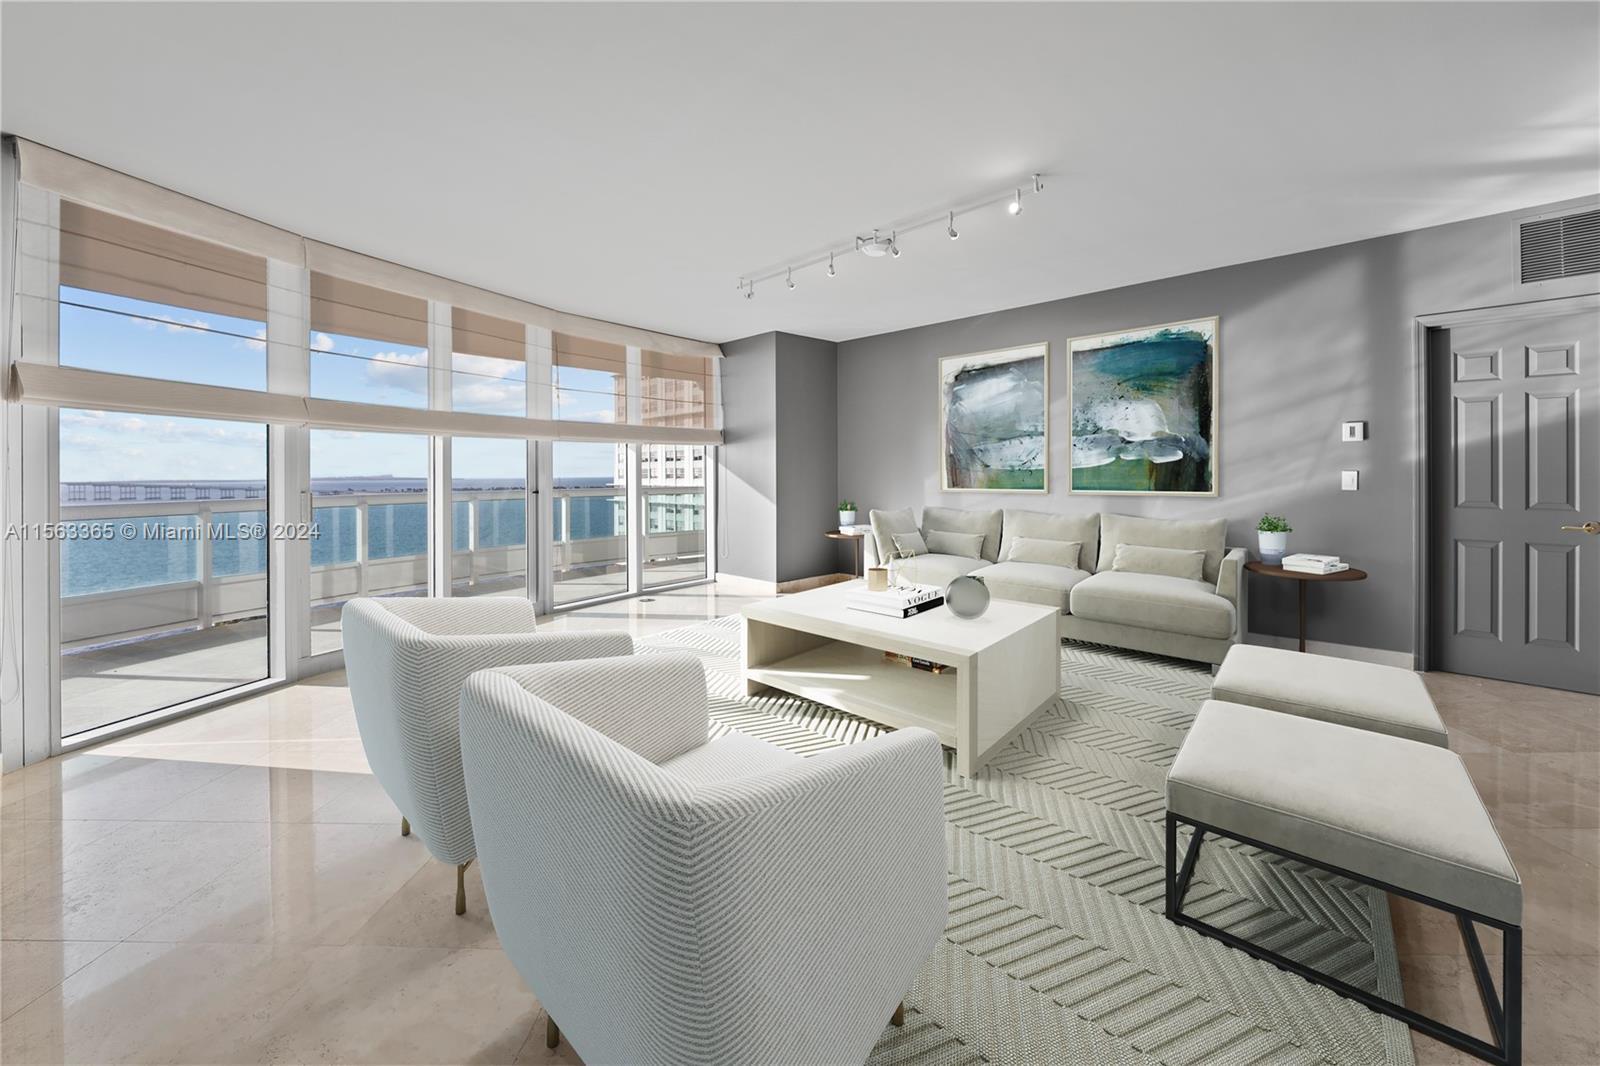 Be among the first to discover the breathtaking remodeled Santa Maria! Stunning renderings are provi